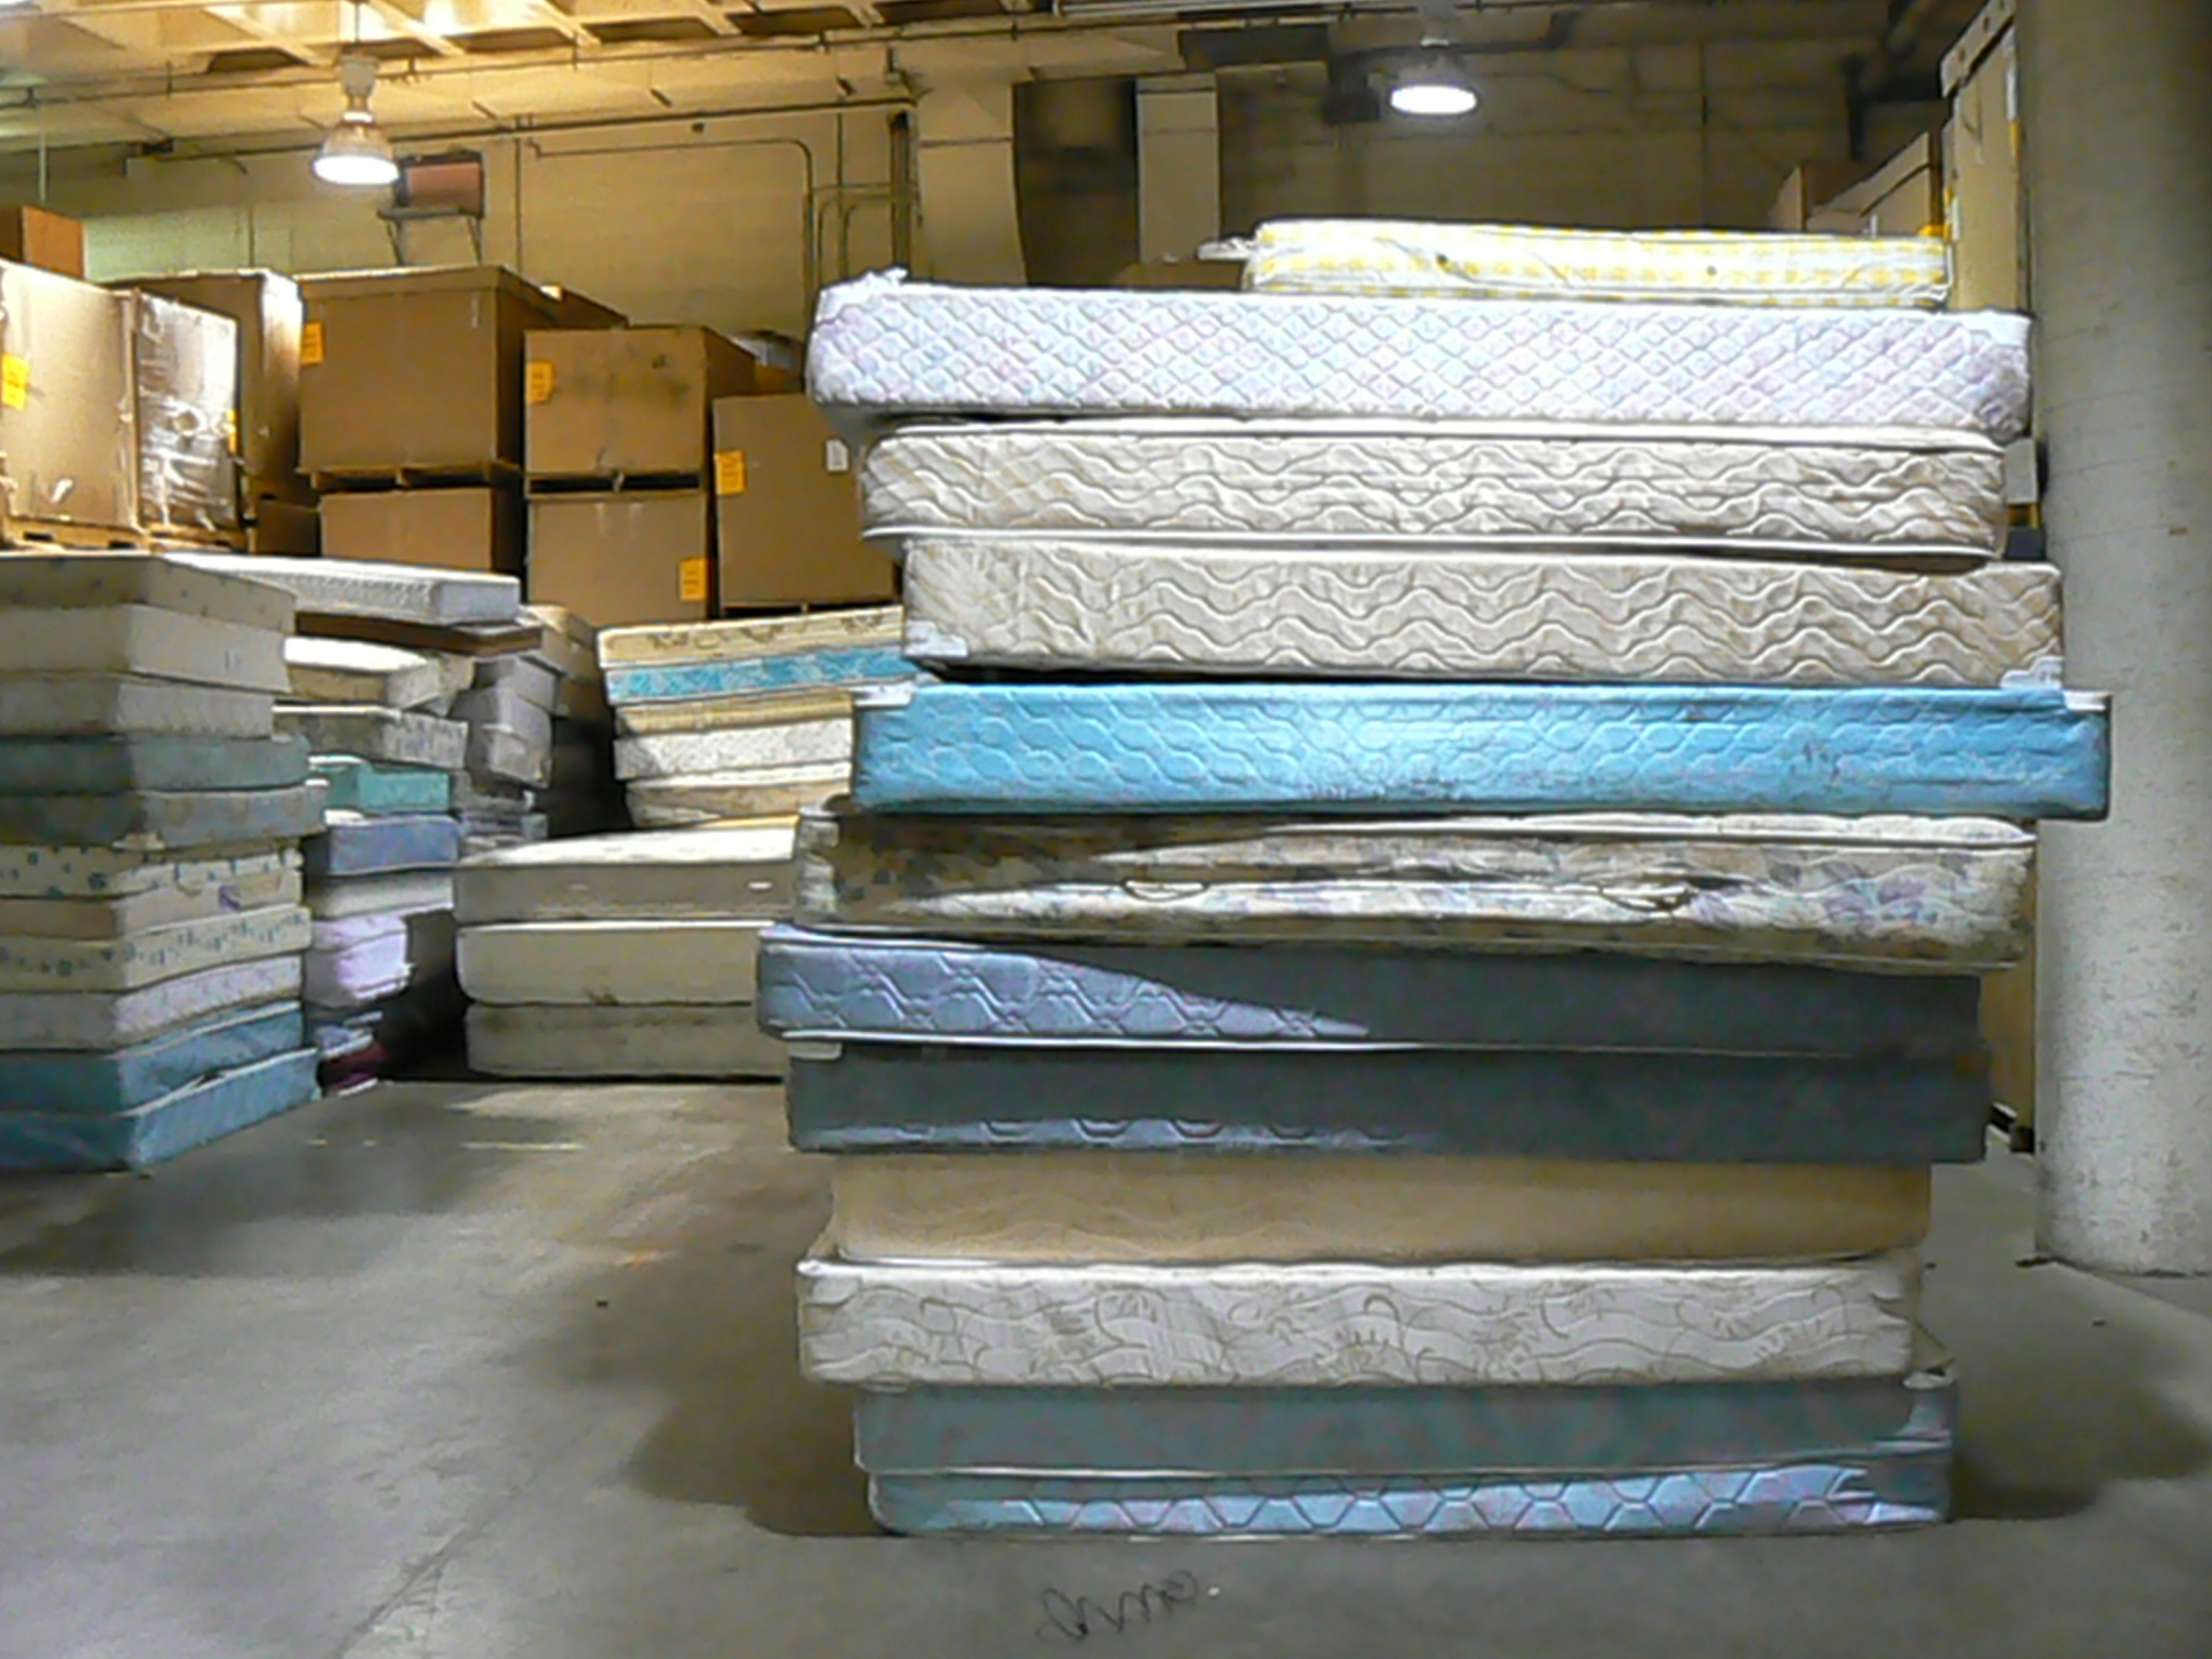 can you donate old mattresses